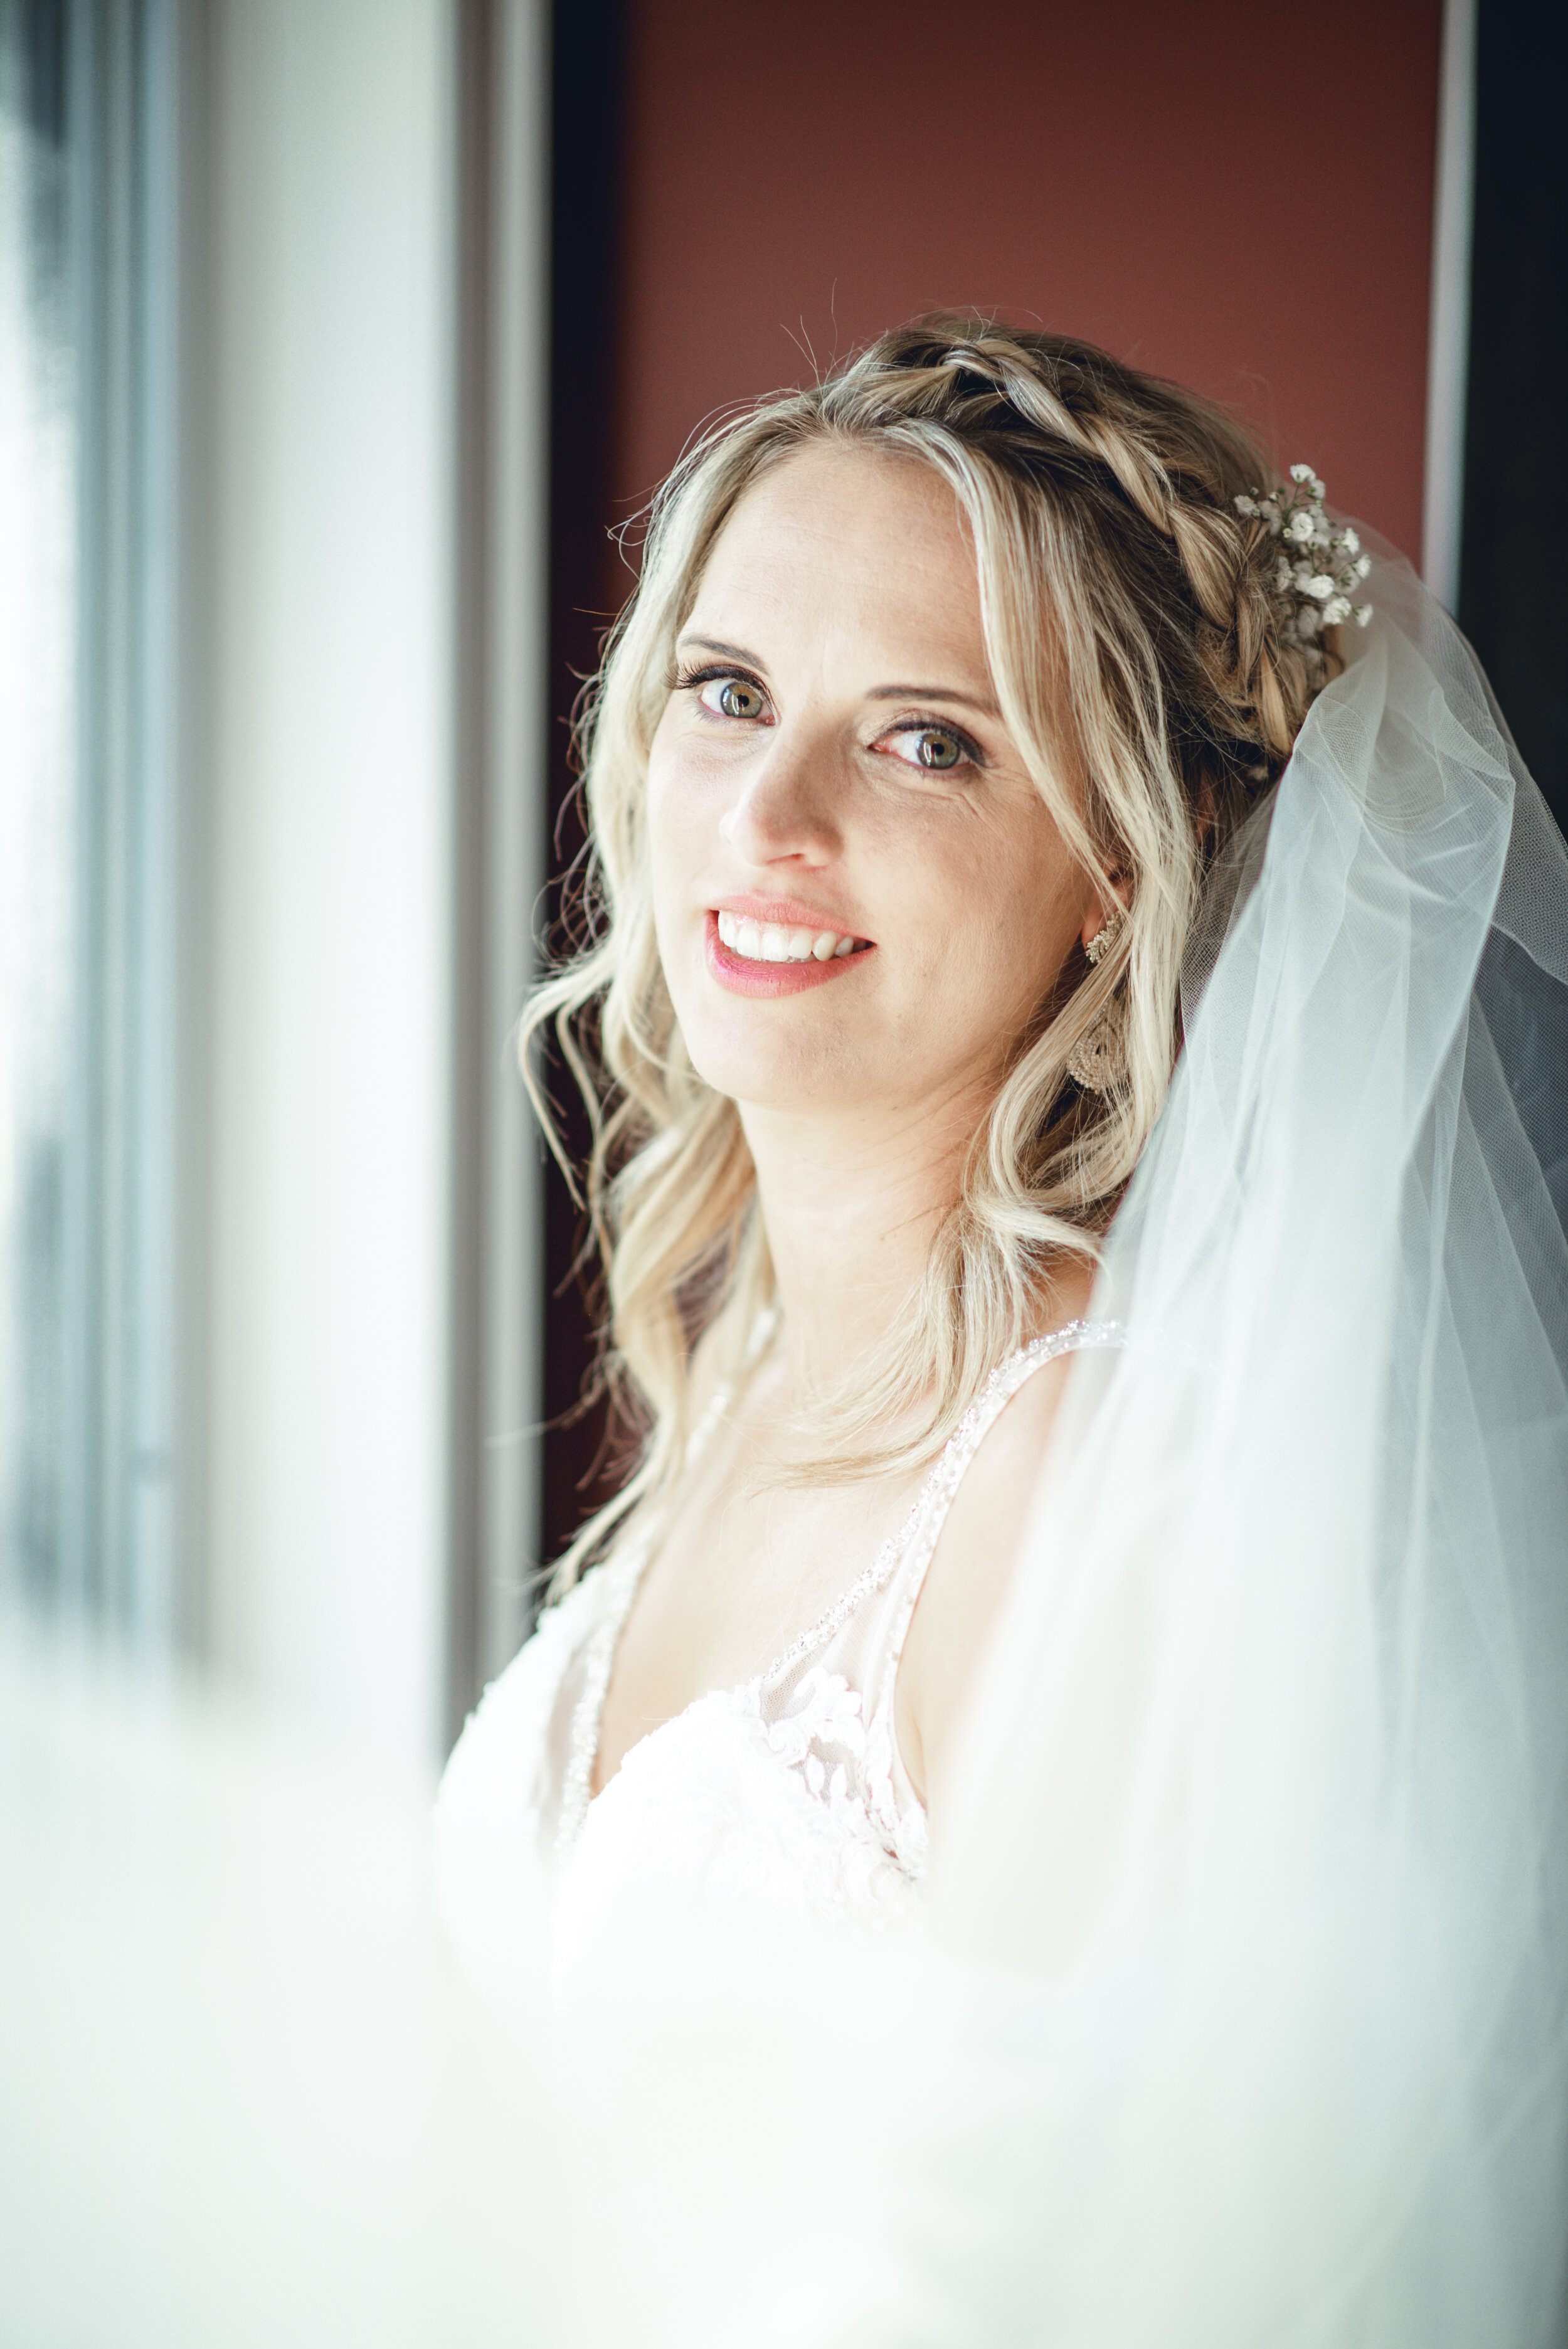 Ali is ready for her wedding - eTangPhotography.com